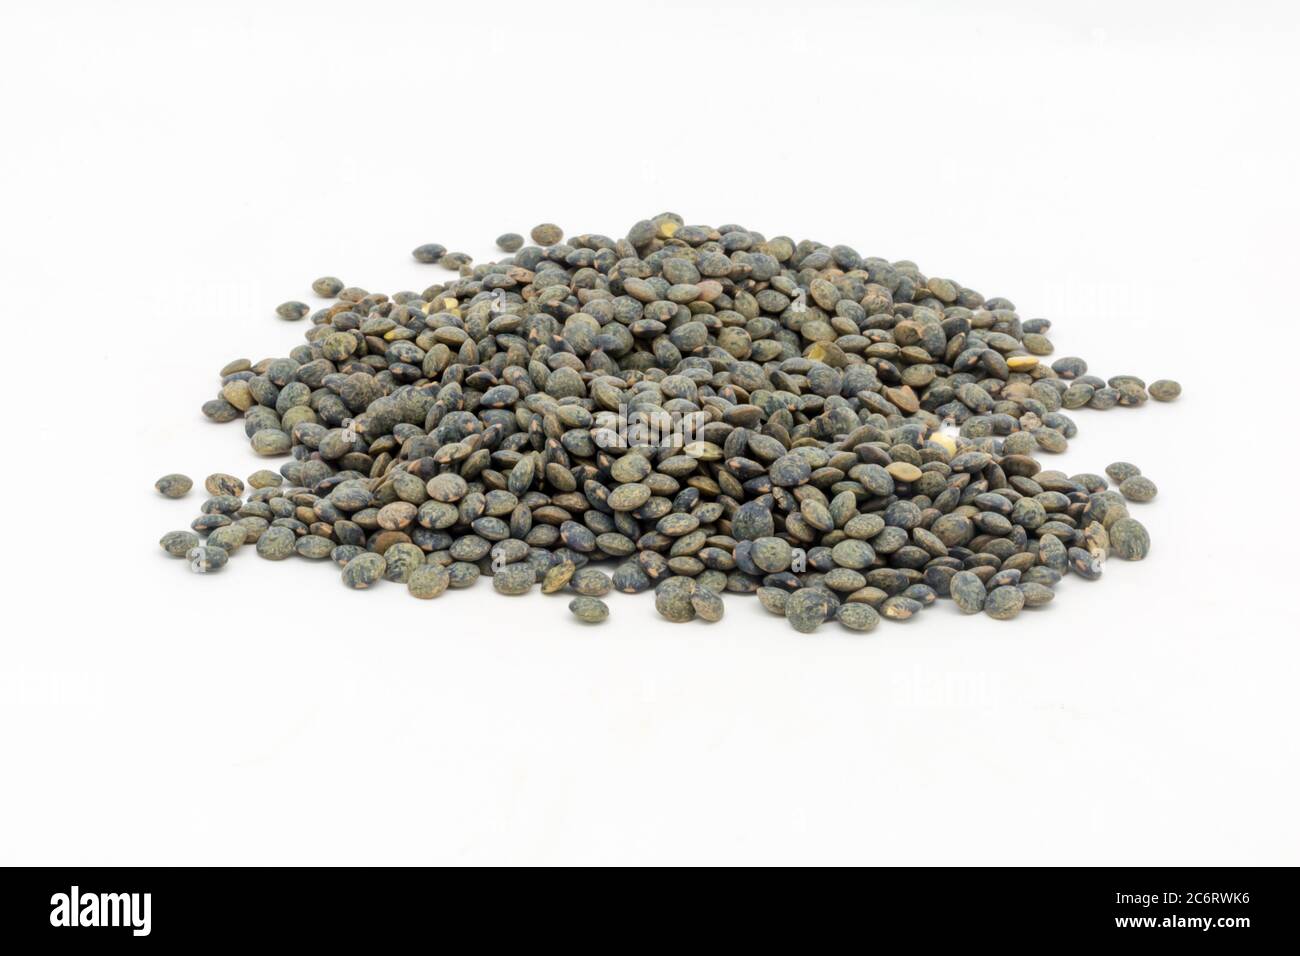 Dried puy lentils against a white background Stock Photo